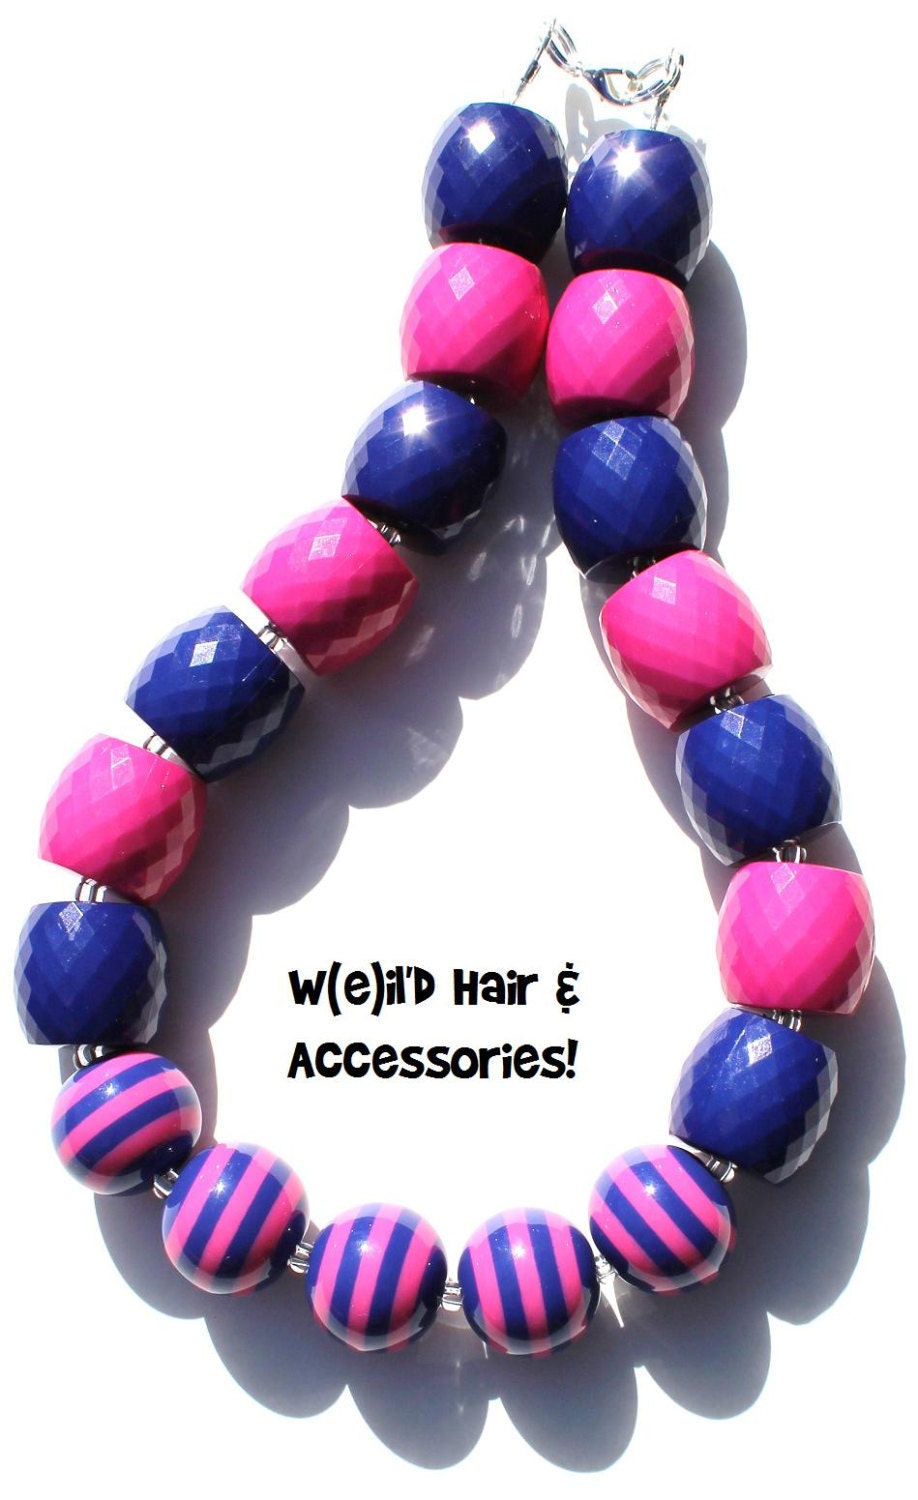 Chunky Bubblegum Necklace - Hot Pink and Navy - Trendy - In the Navy - Photo prop - WeildHairAccessories